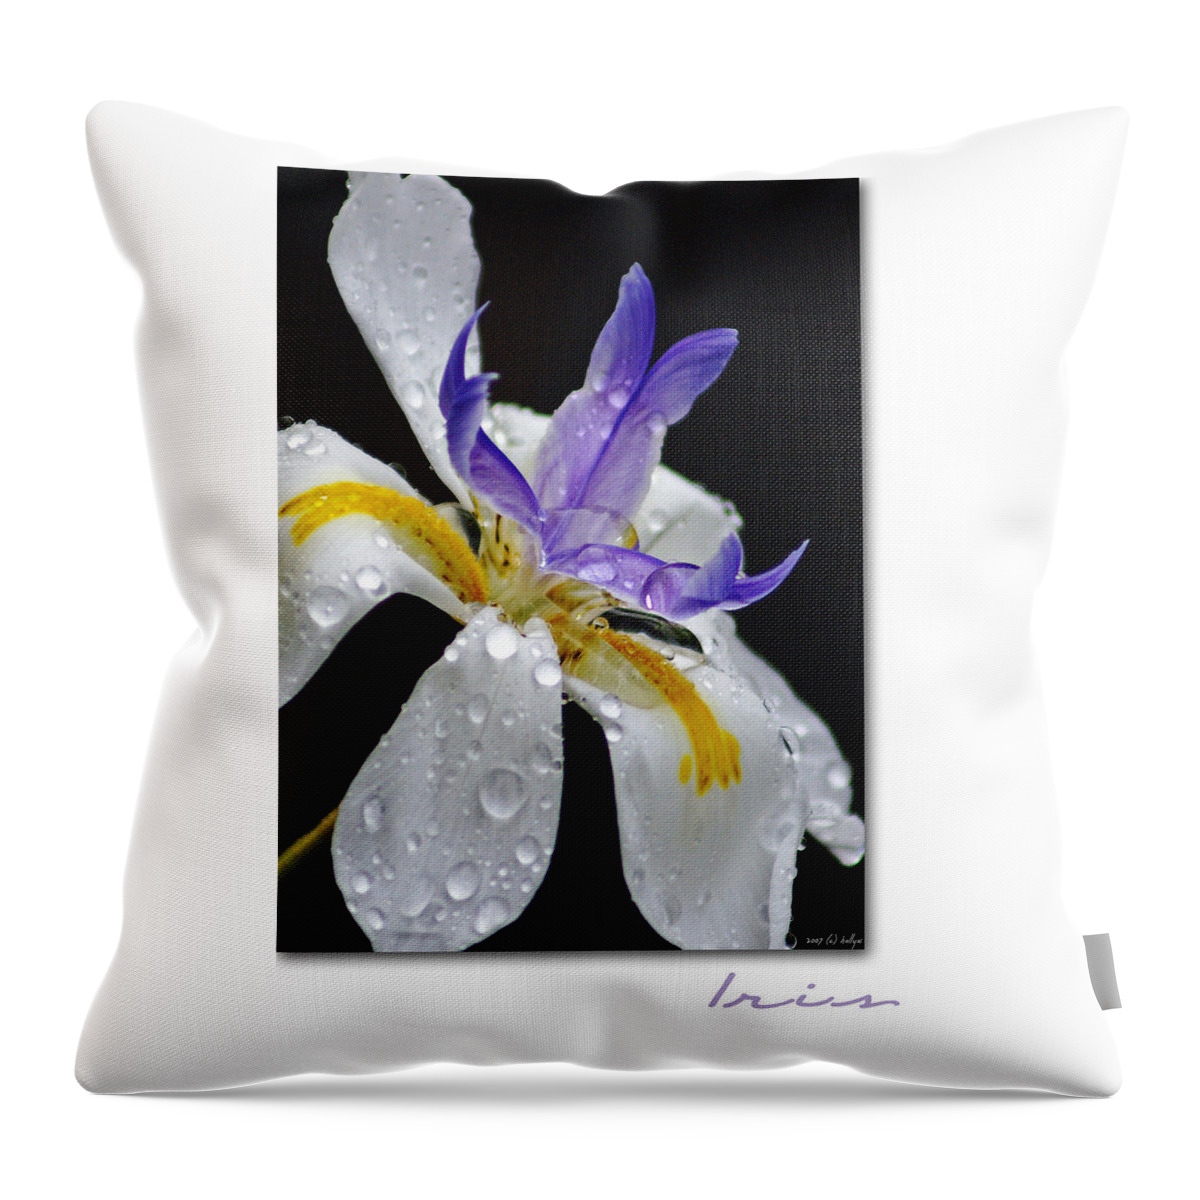 Flowers Throw Pillow featuring the photograph African Iris by Holly Kempe